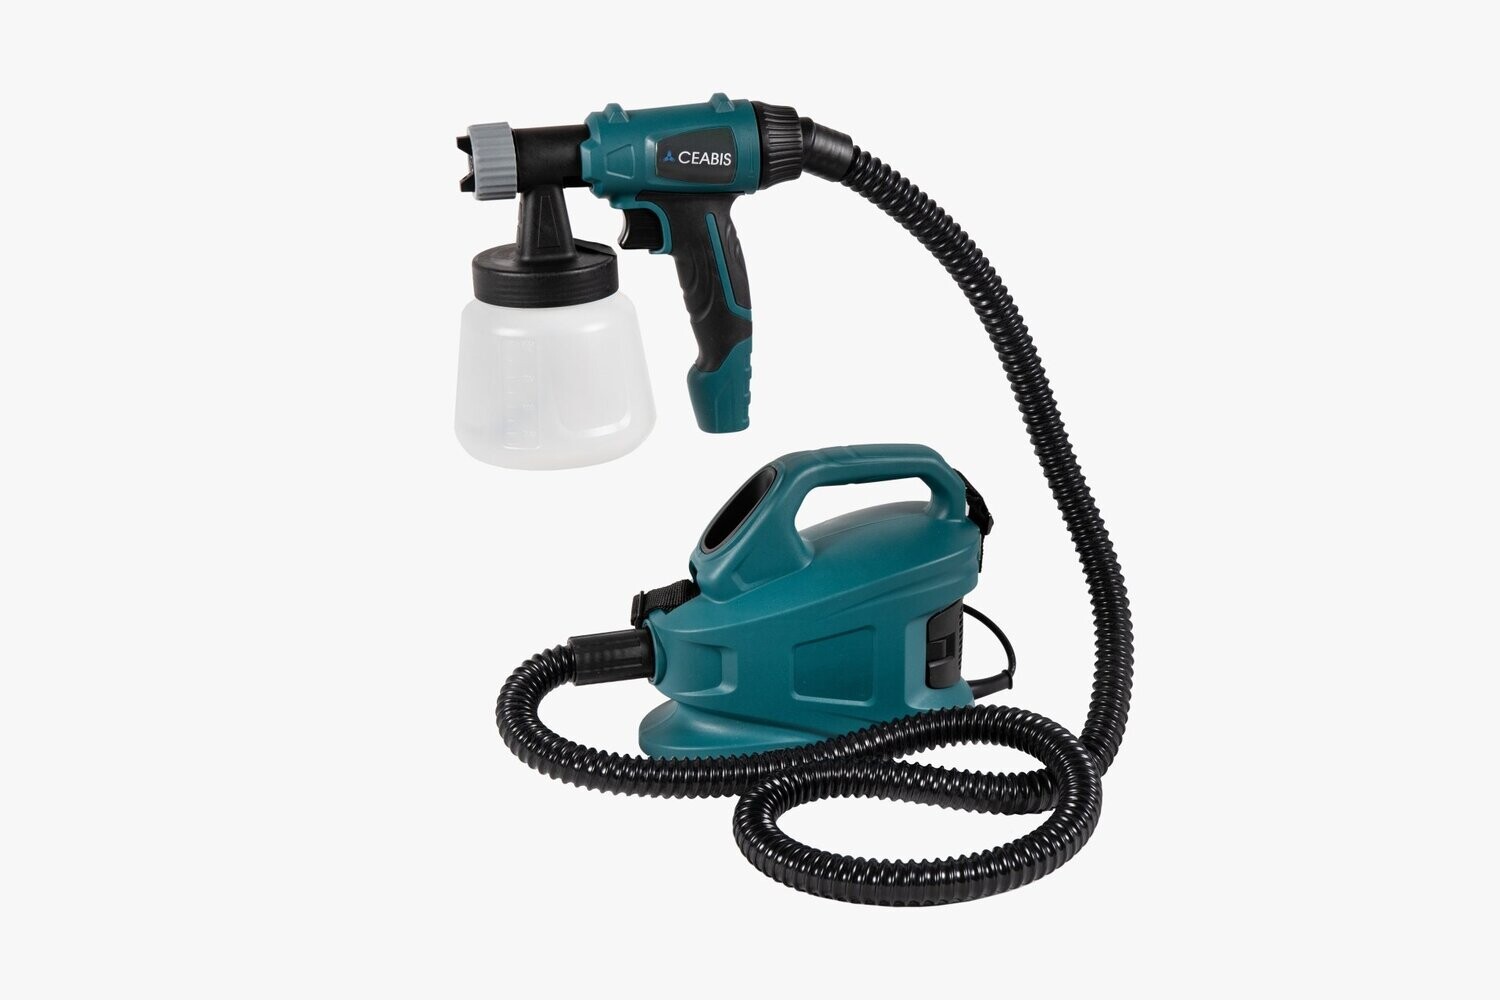 Sanitizing spray gune for surfaces and environments